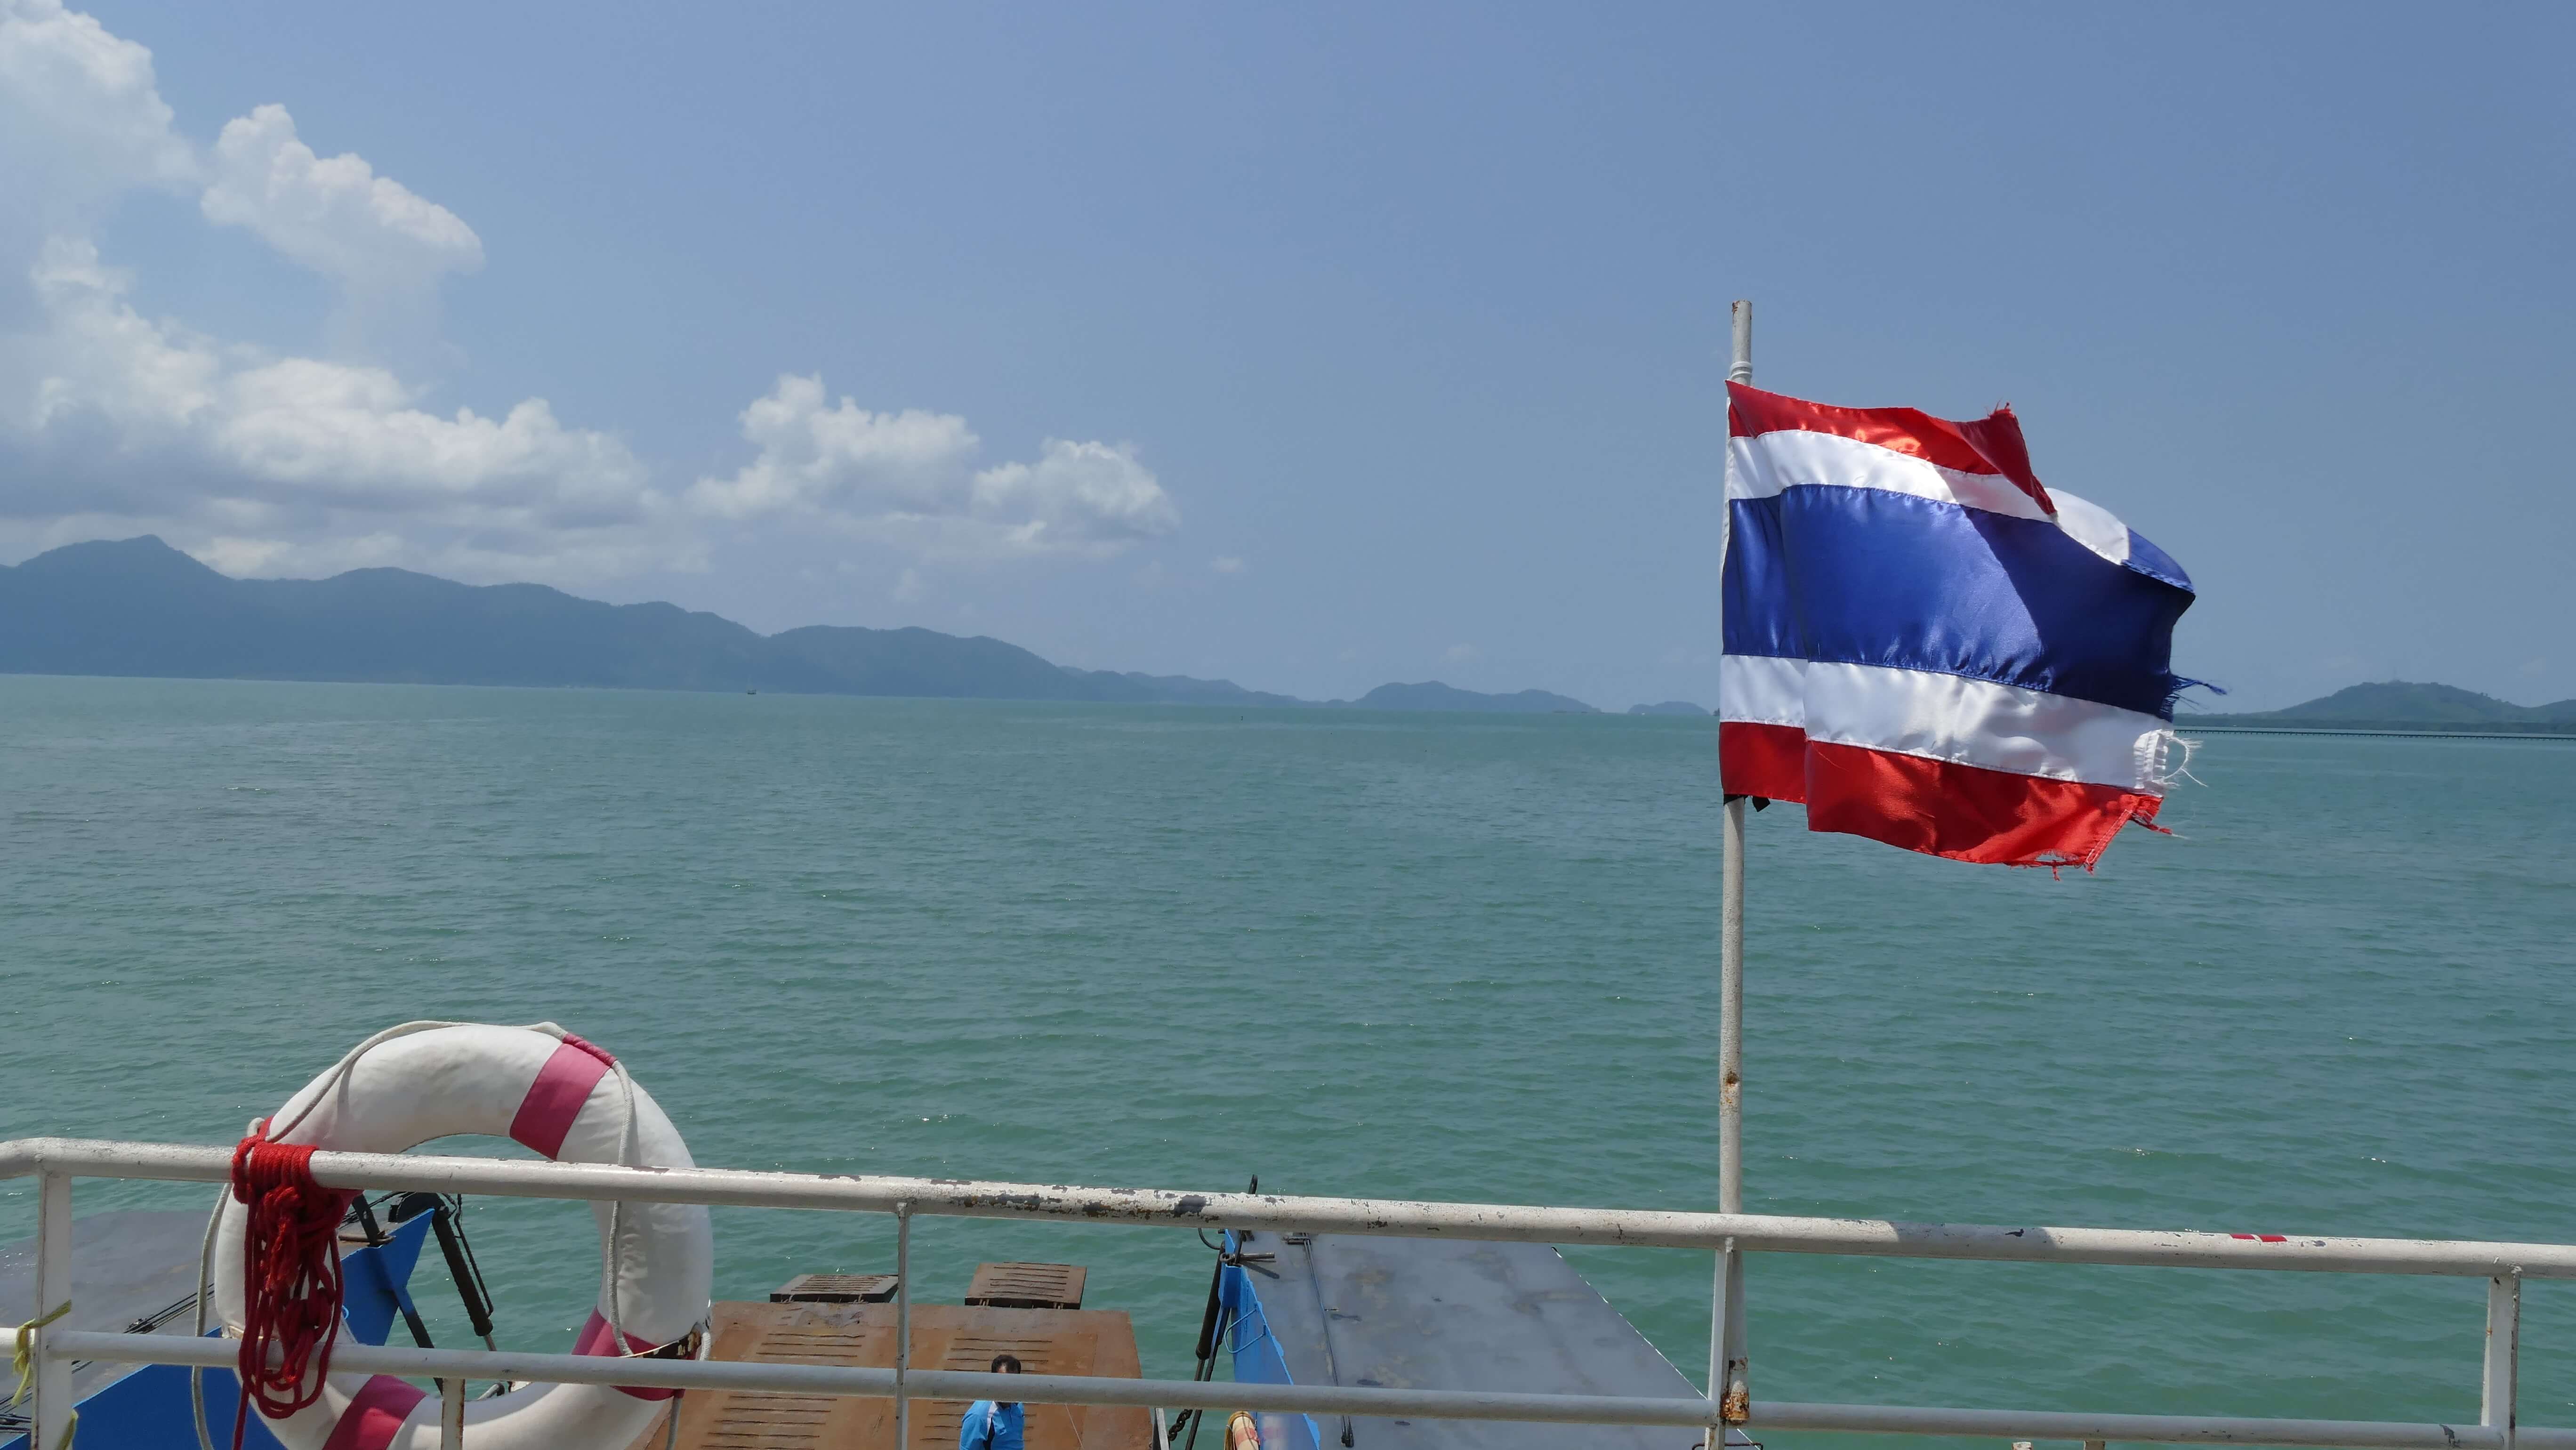 Day 40  (19.03) – To Koh Chang Island, Thailand